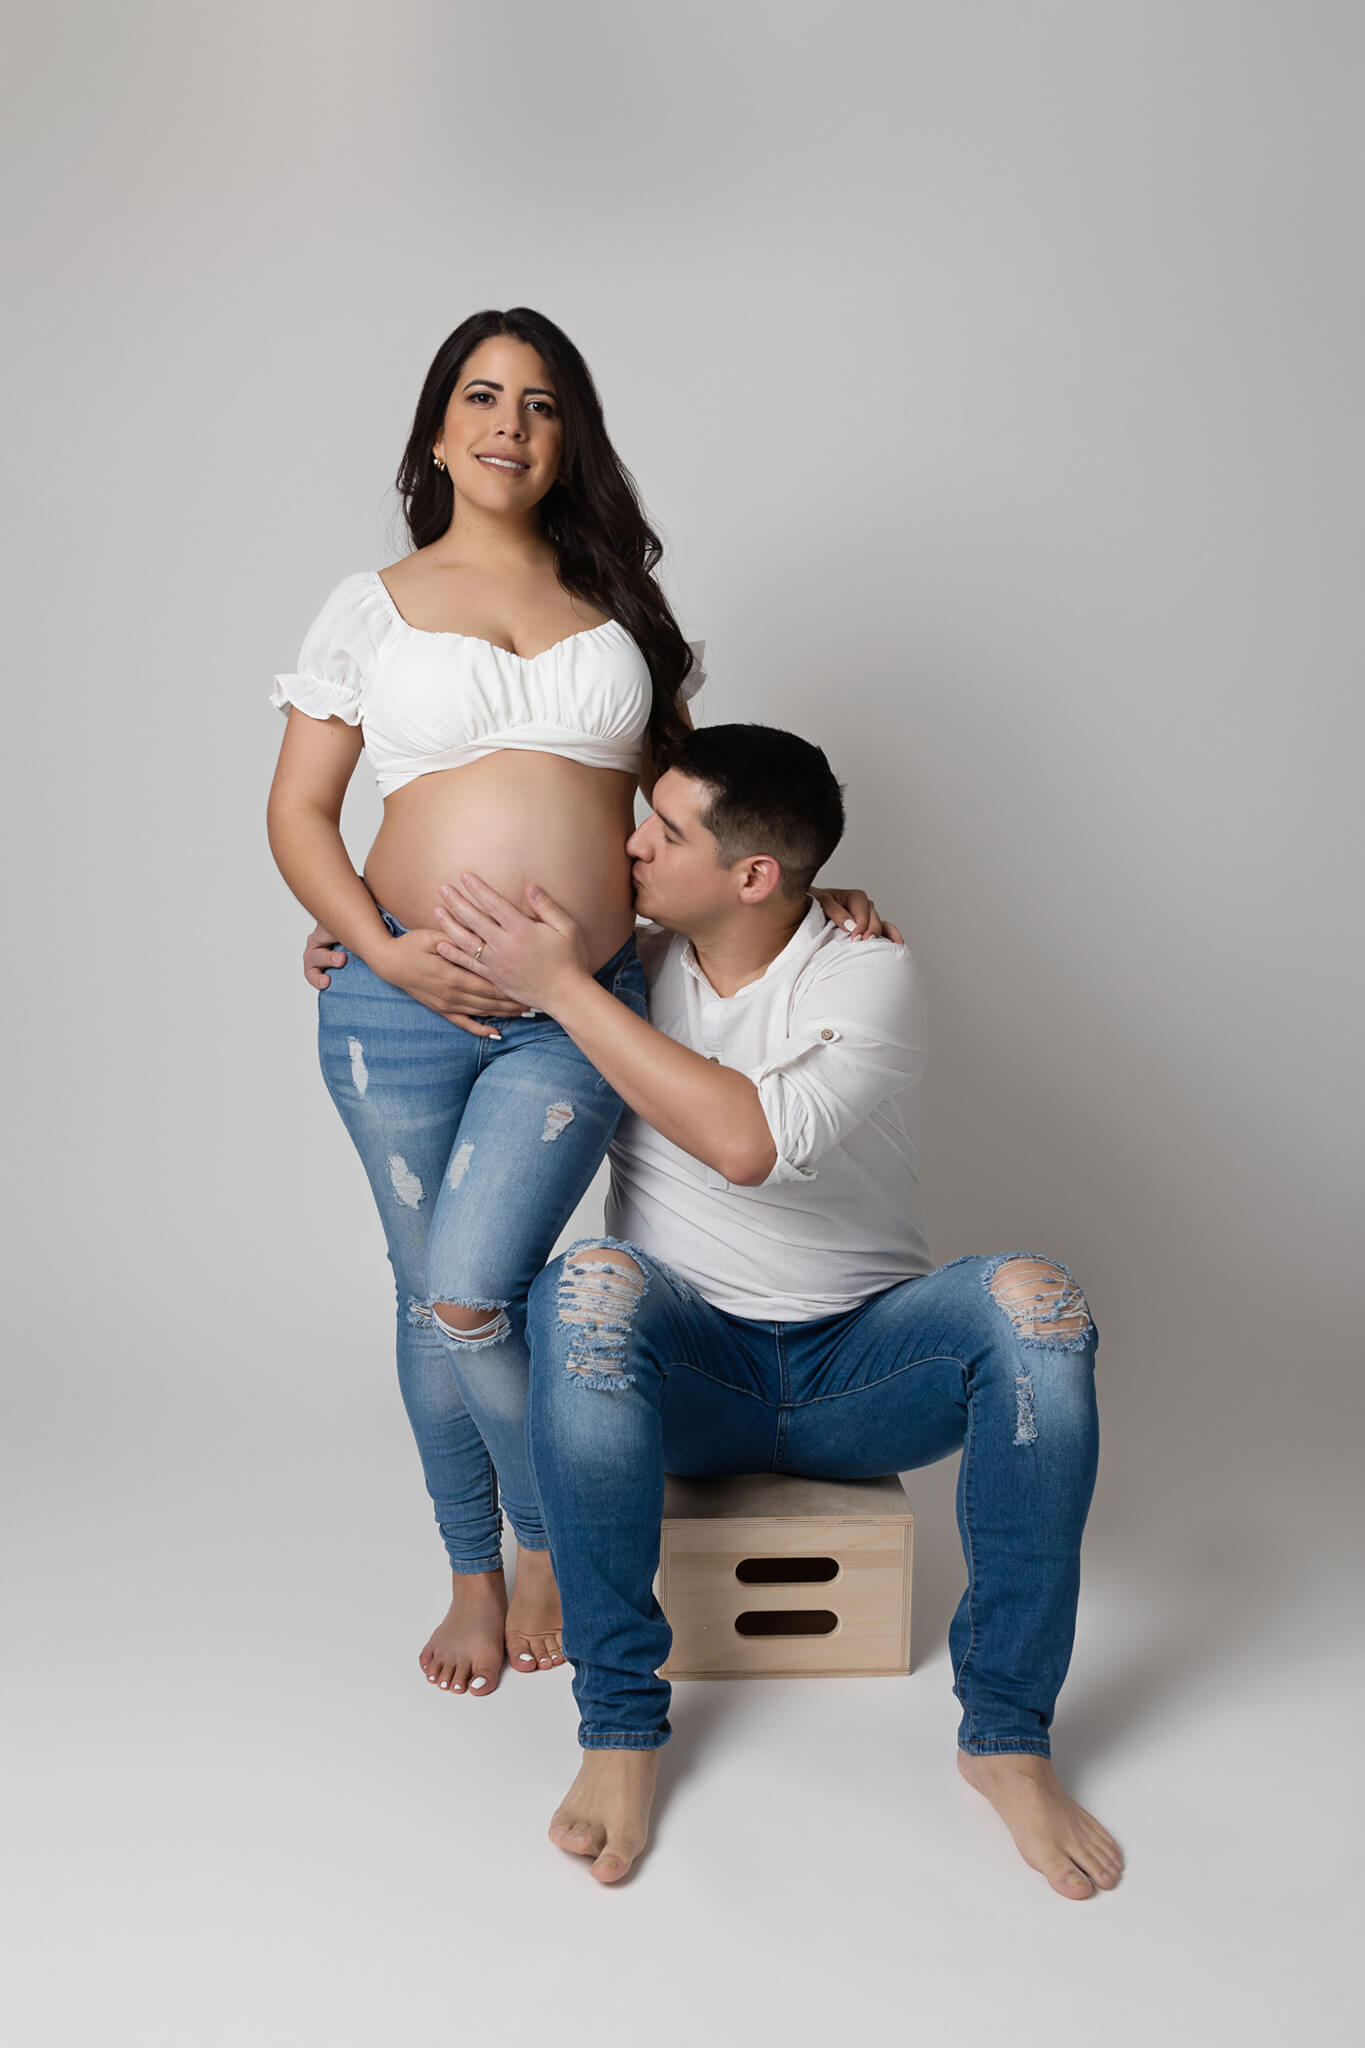 A husband sits on an apple box in a studio kissing the belly of his pregnant wife in jeans and white shirts thanks to fertility clinic austin